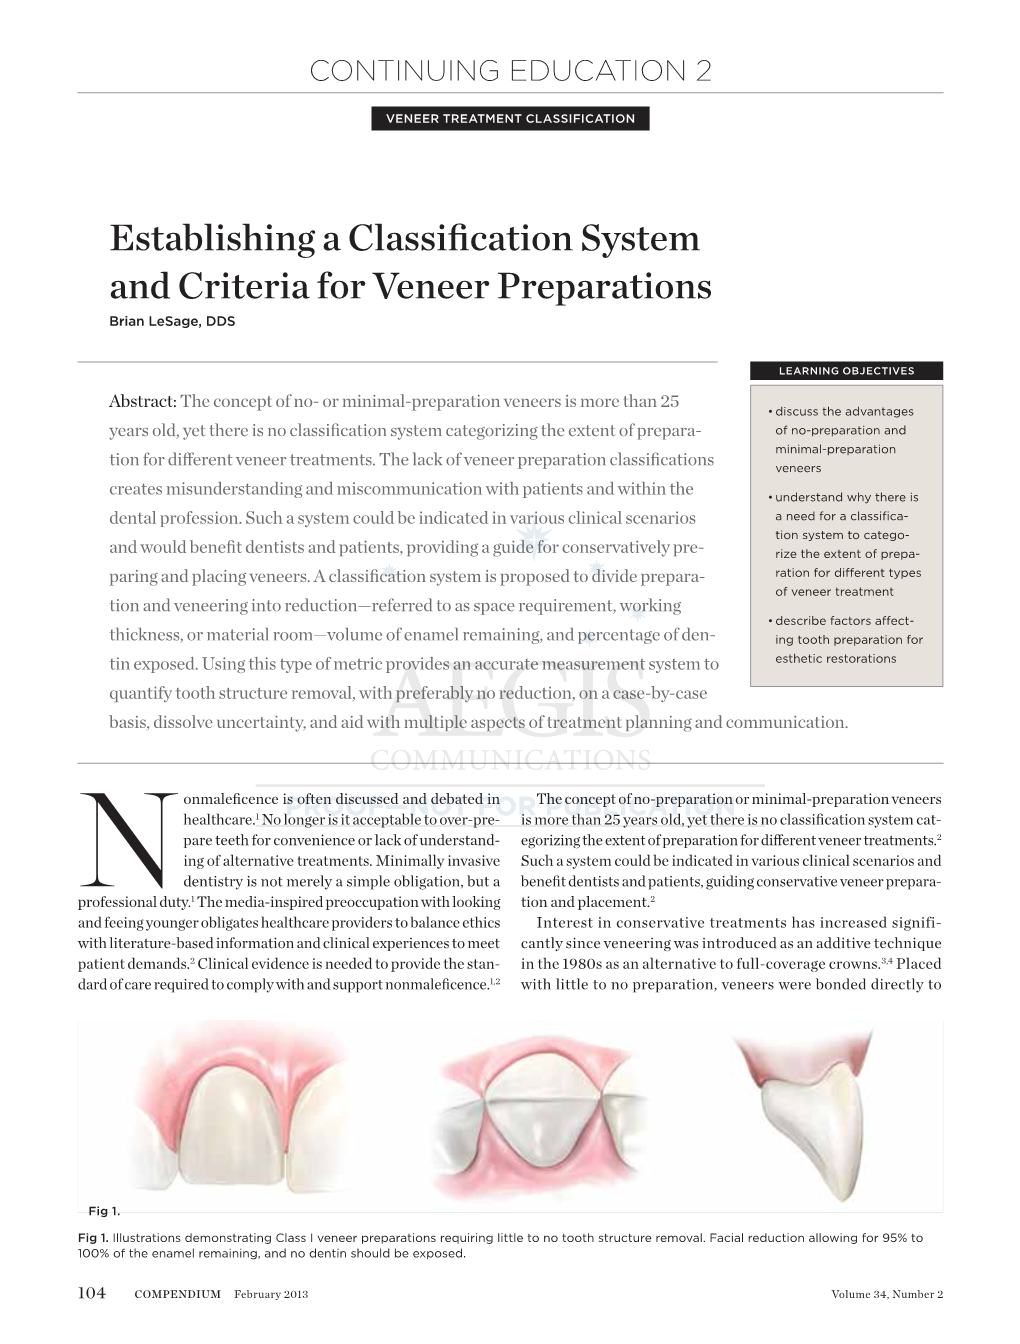 Establishing a Classification System and Criteria for Veneer Preparations Brian Lesage, DDS